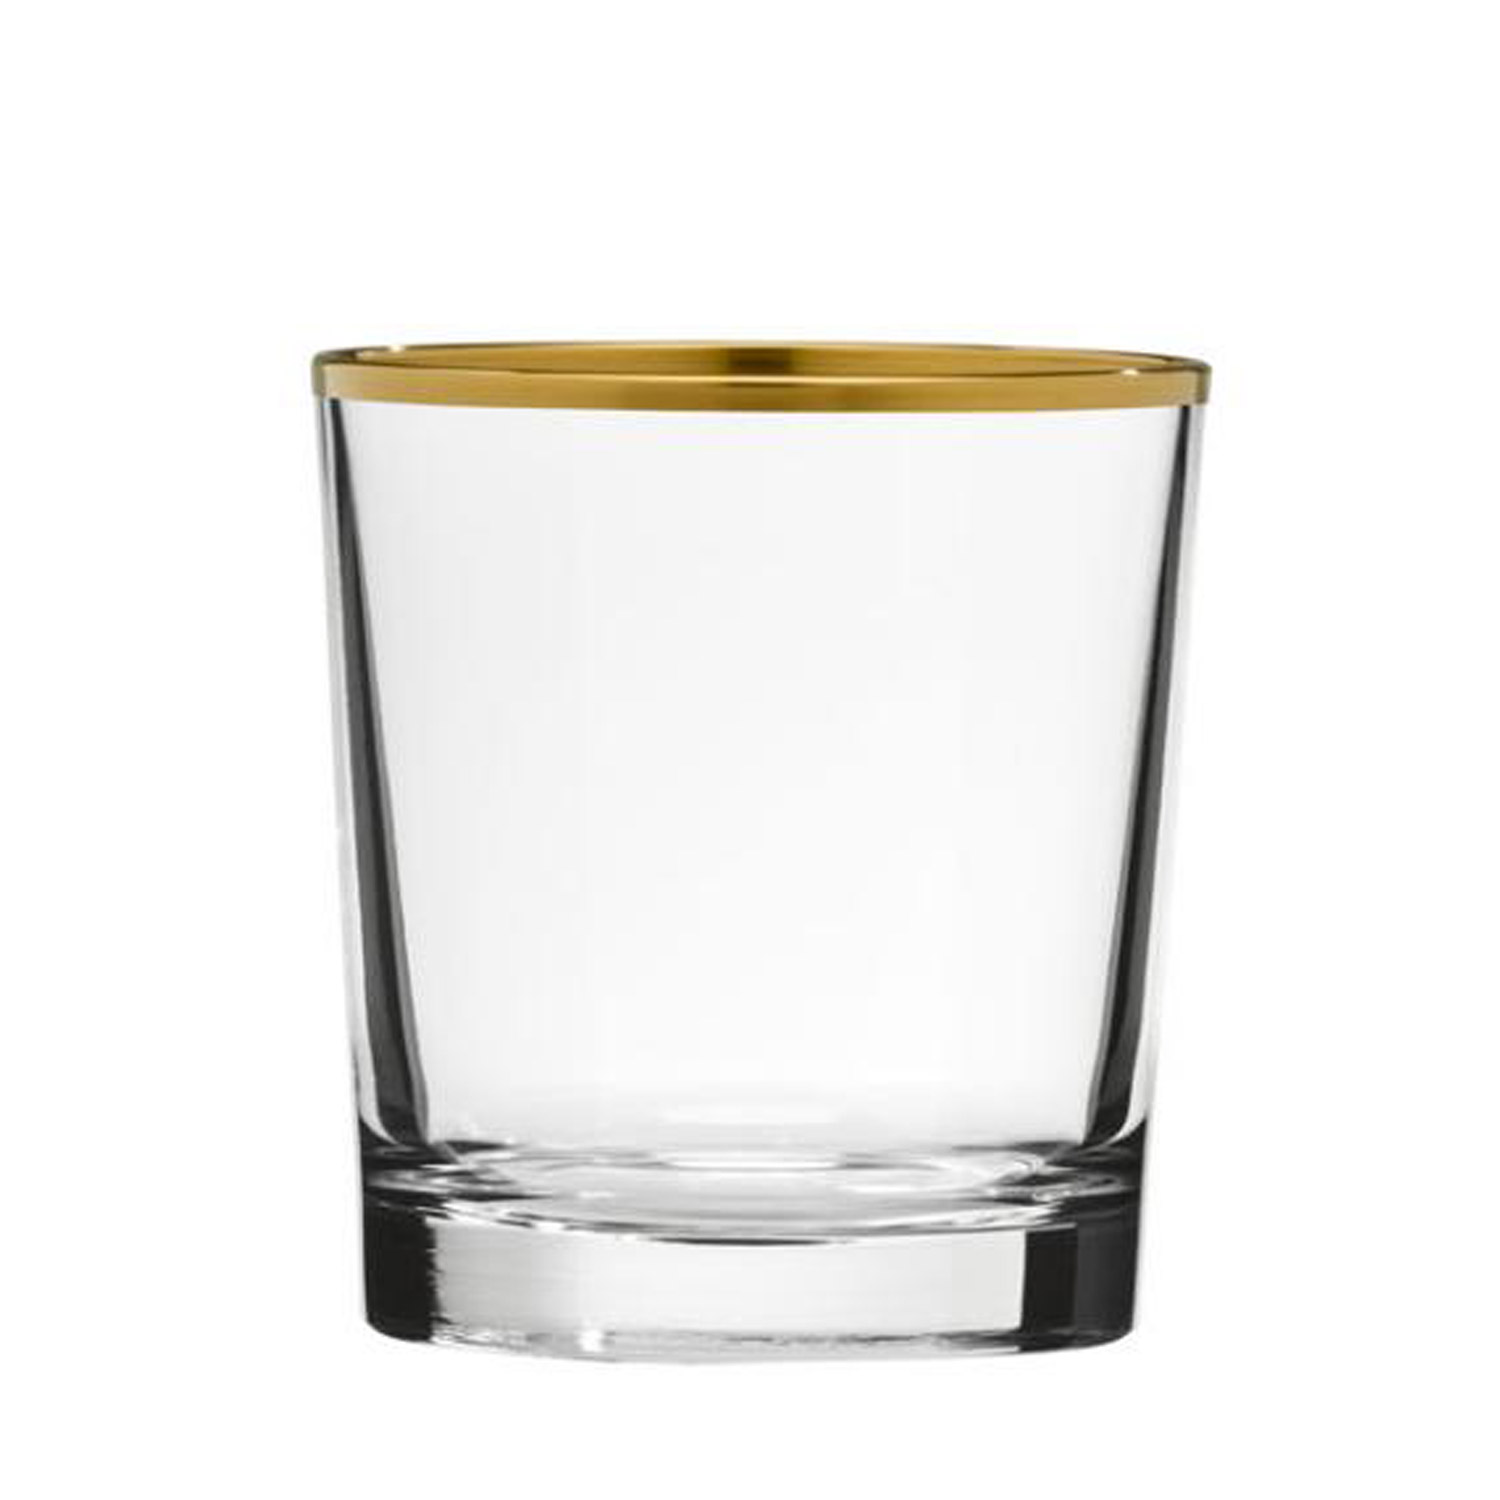 Whiskyglas Kristall Pure Gold clear (9,3 cm)